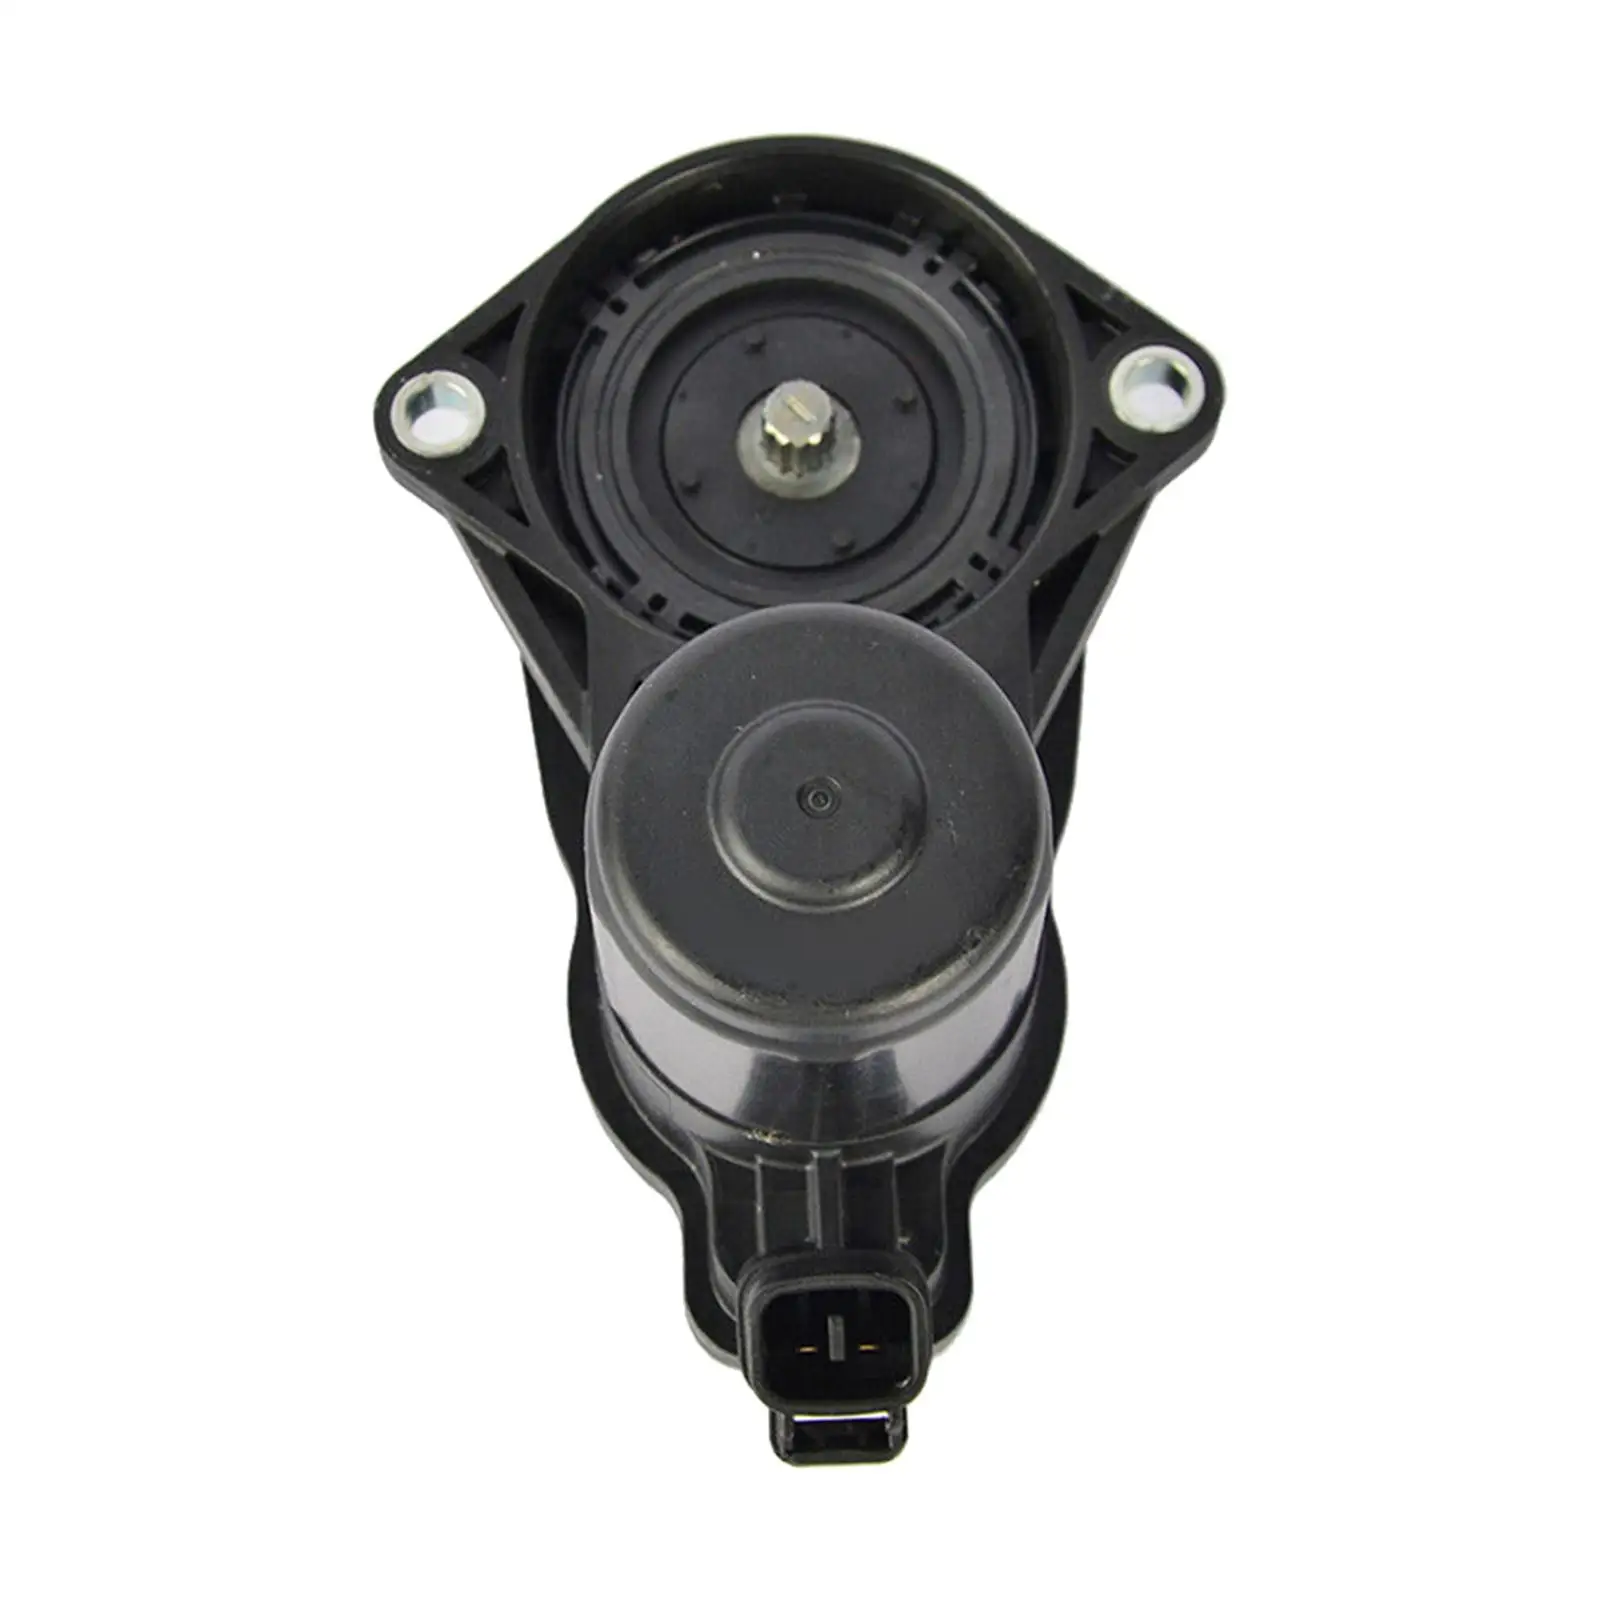 Parking Brake Actuator Assembly Automotive Replacement Part replacement for toyota for c-hr Avalon Corolla Sedan